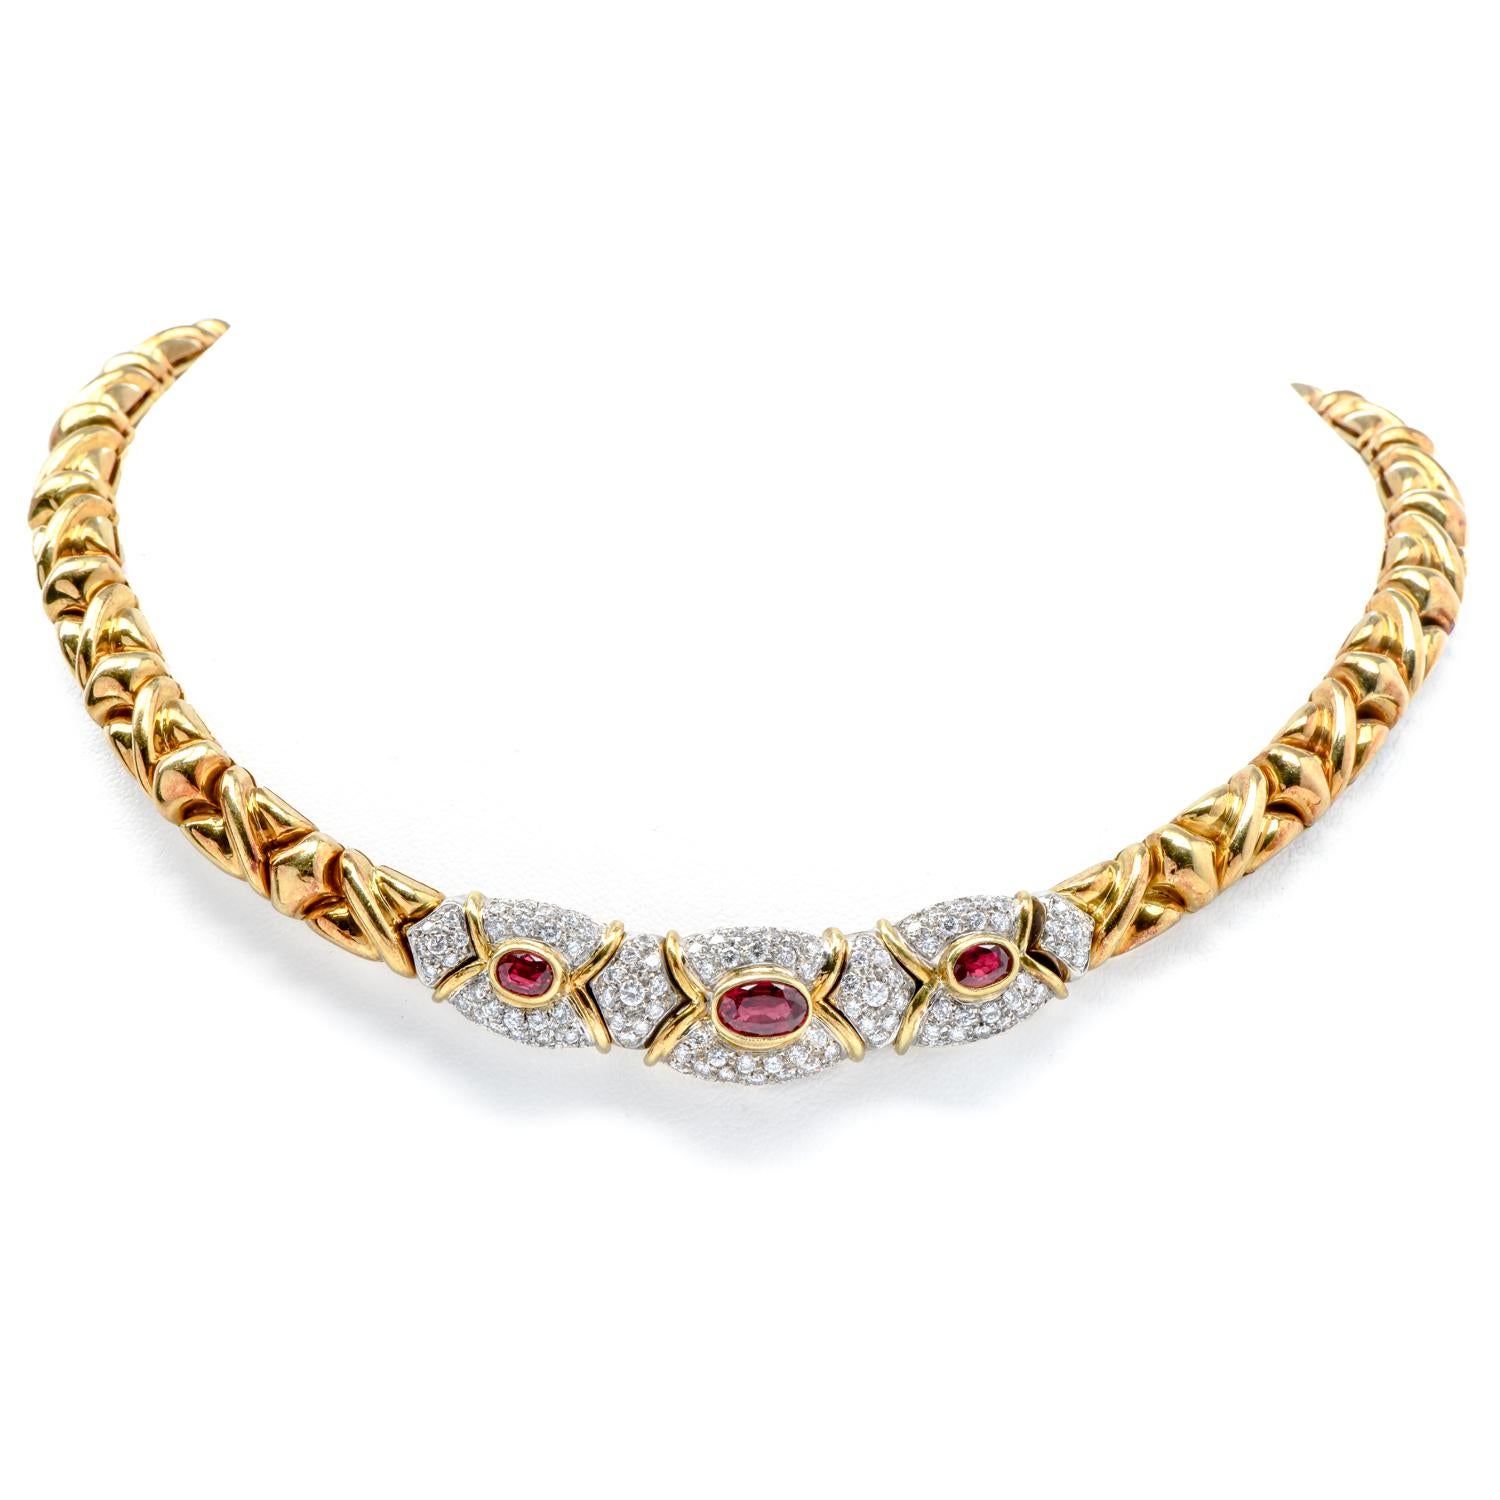 An exquisite Italian-made set of Diamond & Ruby jewelry, with matching ring, earrings & spectacular collar link necklace.

Completely crafted in 18K Yellow Gold with 18K White Gold accents.

The necklace is 15